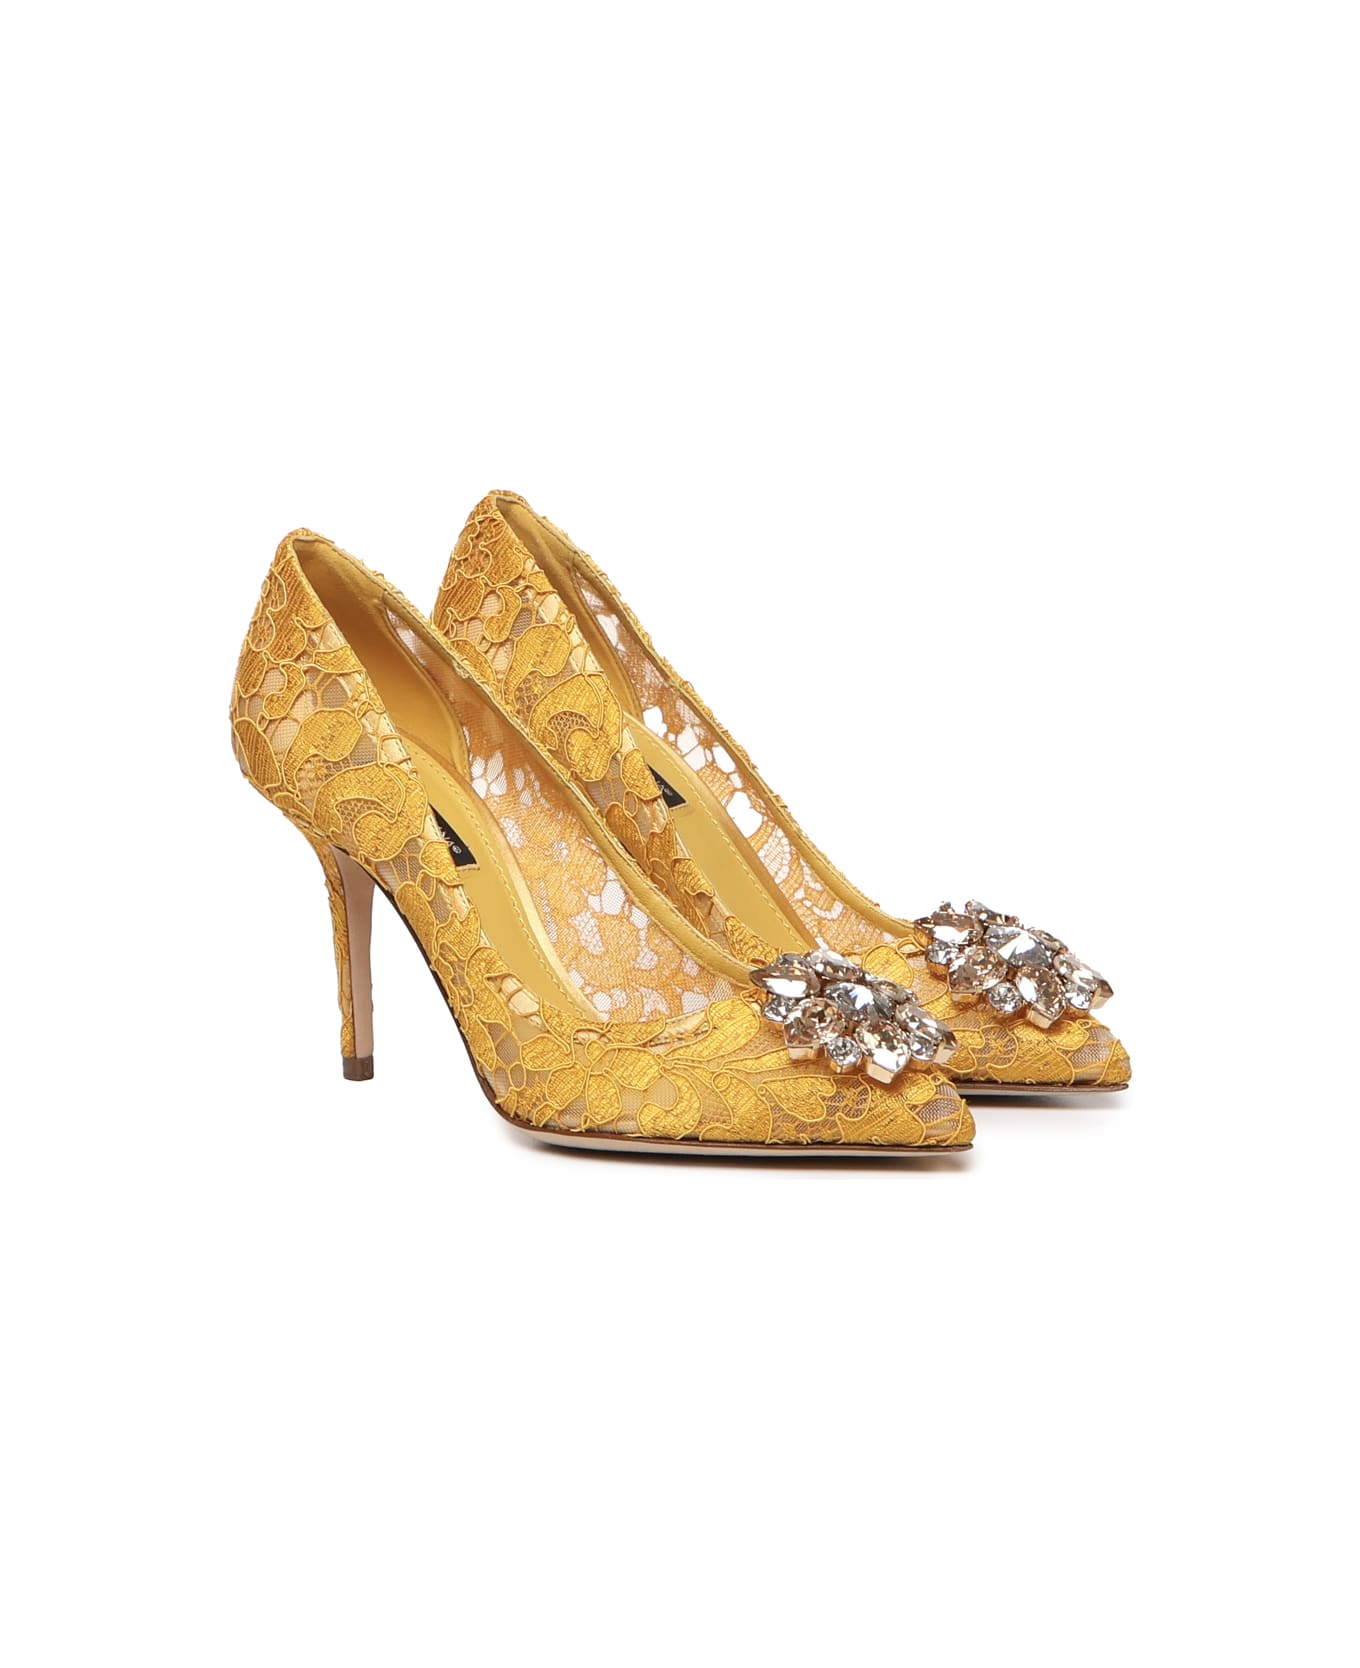 Dolce & Gabbana Bellucci Taormina Lace Pumps With Crystals - Mustard ハイヒール